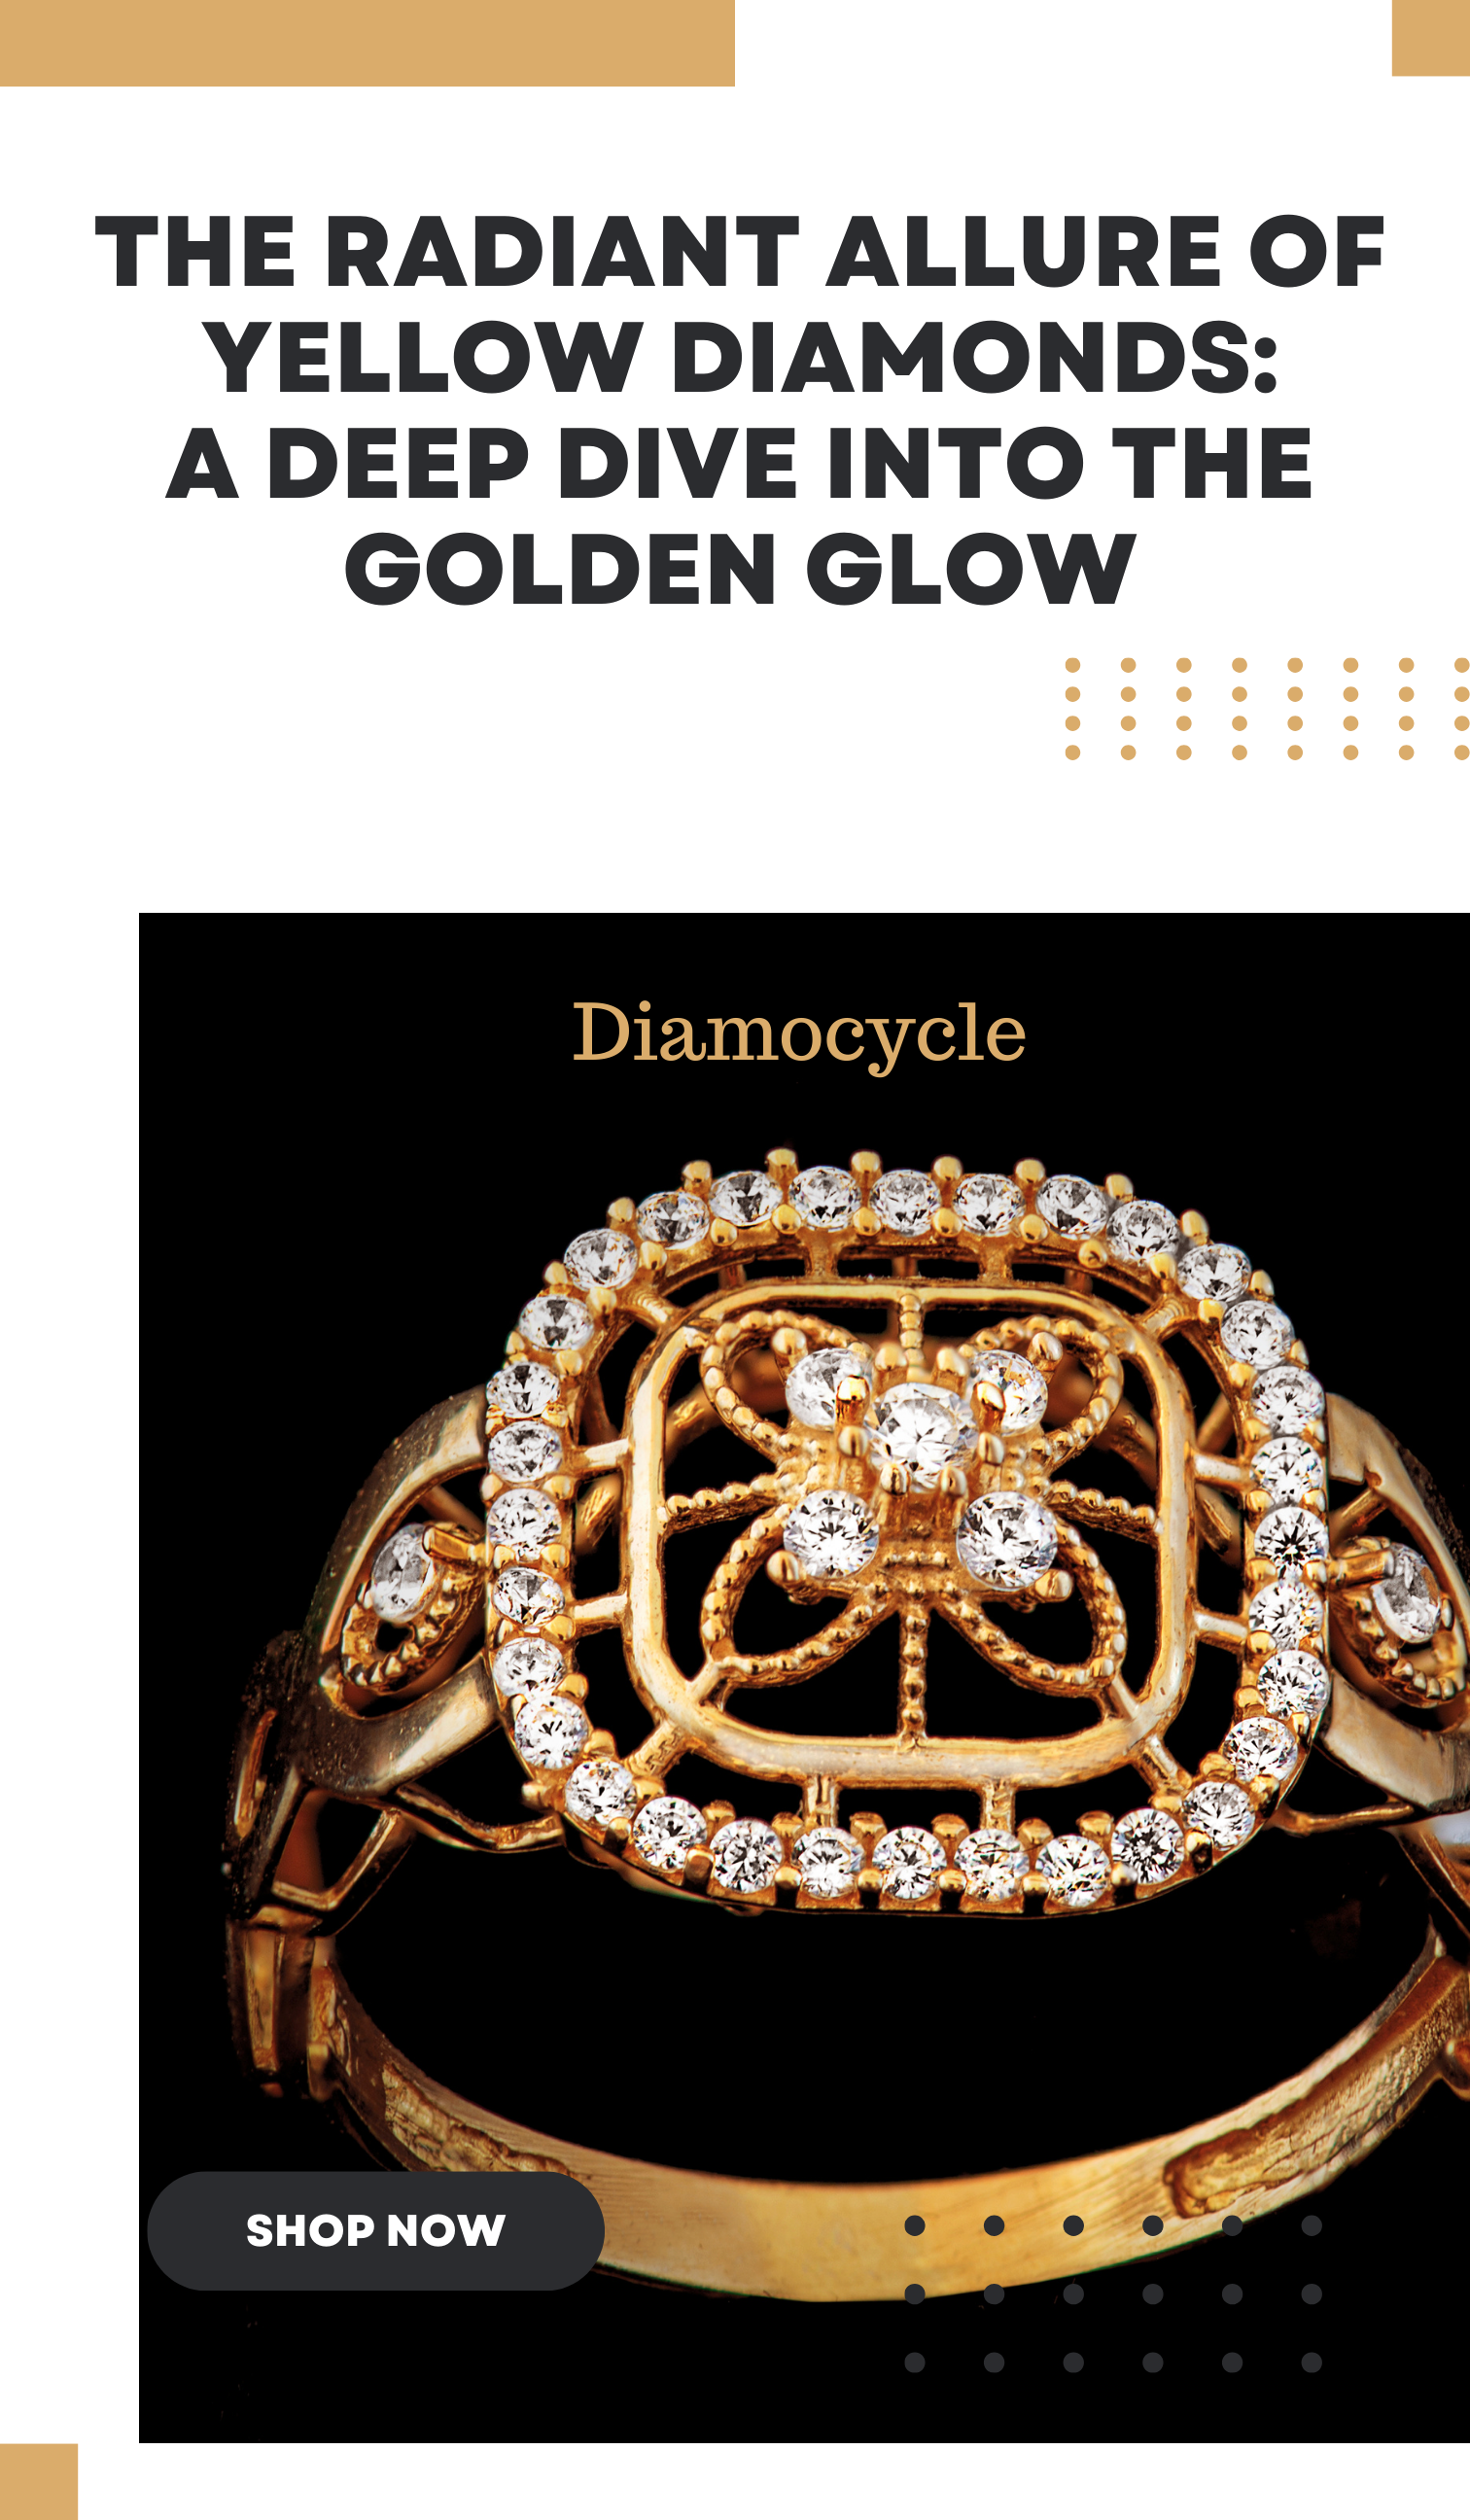 The Radiant Allure of Yellow Diamonds: A Deep Dive into the Golden Glow